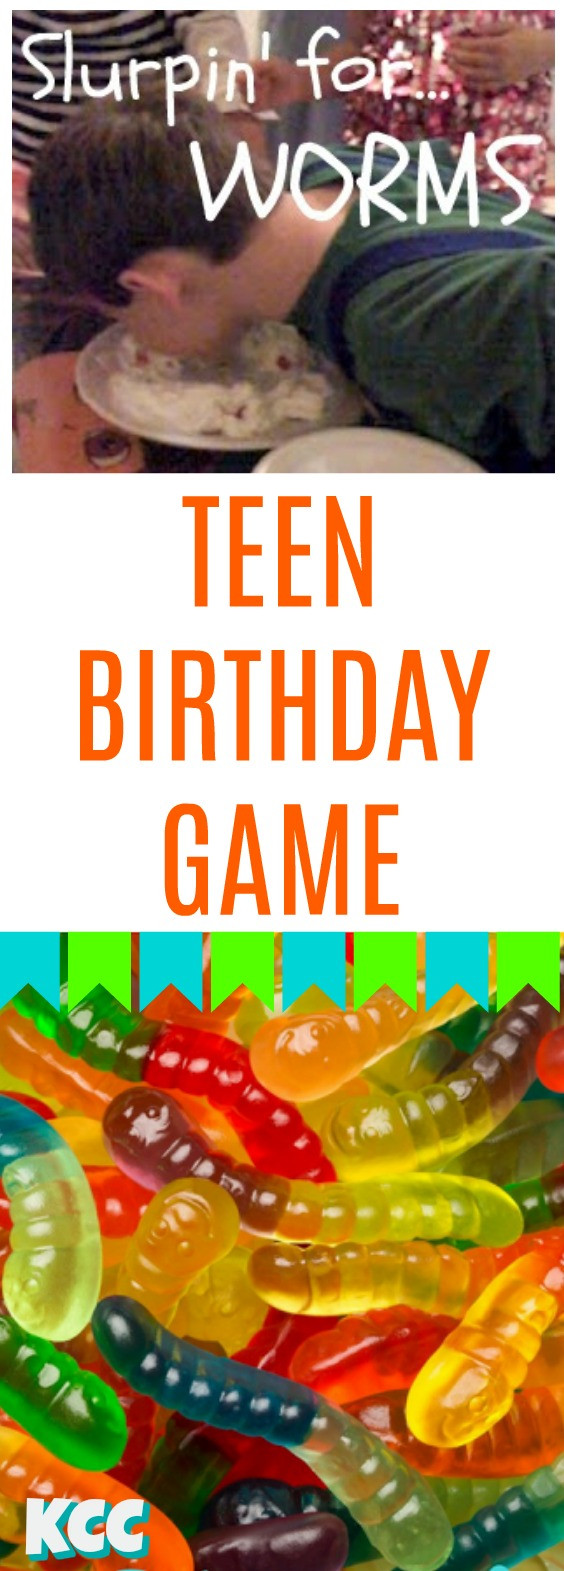 Fun Places To Go For A Teenage Birthday Party
 Over 15 Super Fun Halloween Party Game Ideas for Kids and